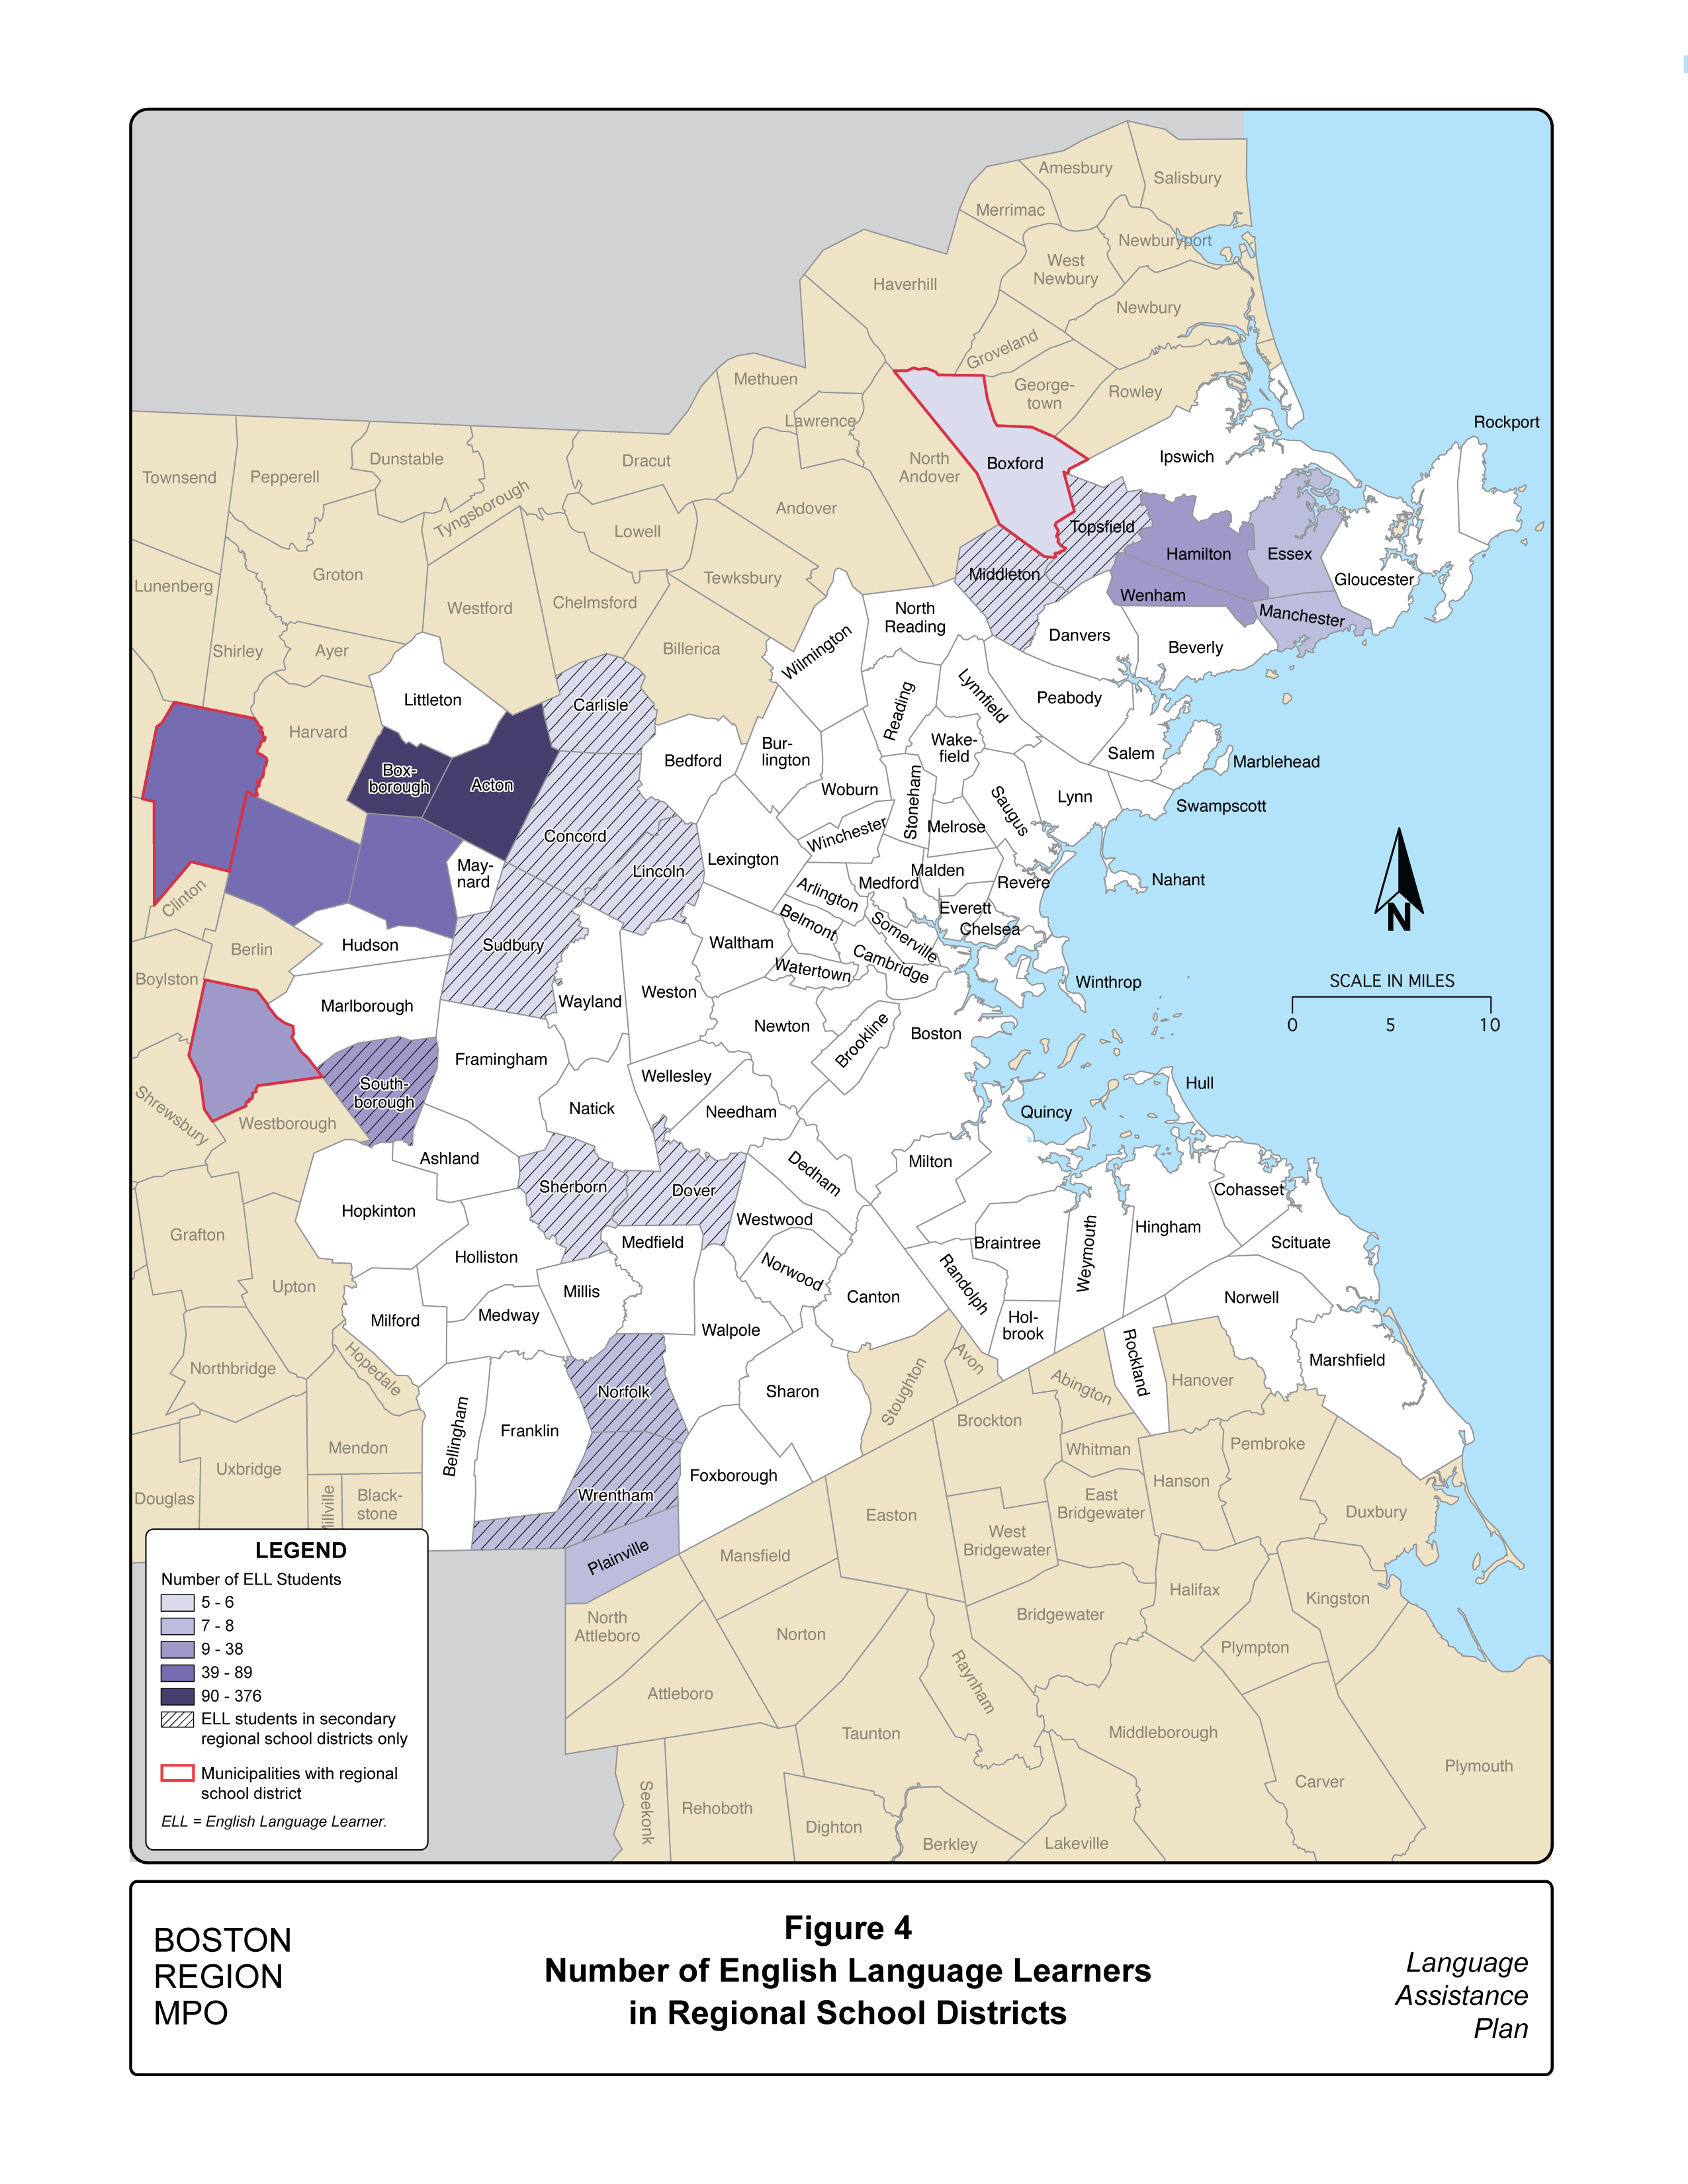 Figure 4 is a map showing the number of English language learners in regional school districts in the Boston region for the 2020–21 academic year.